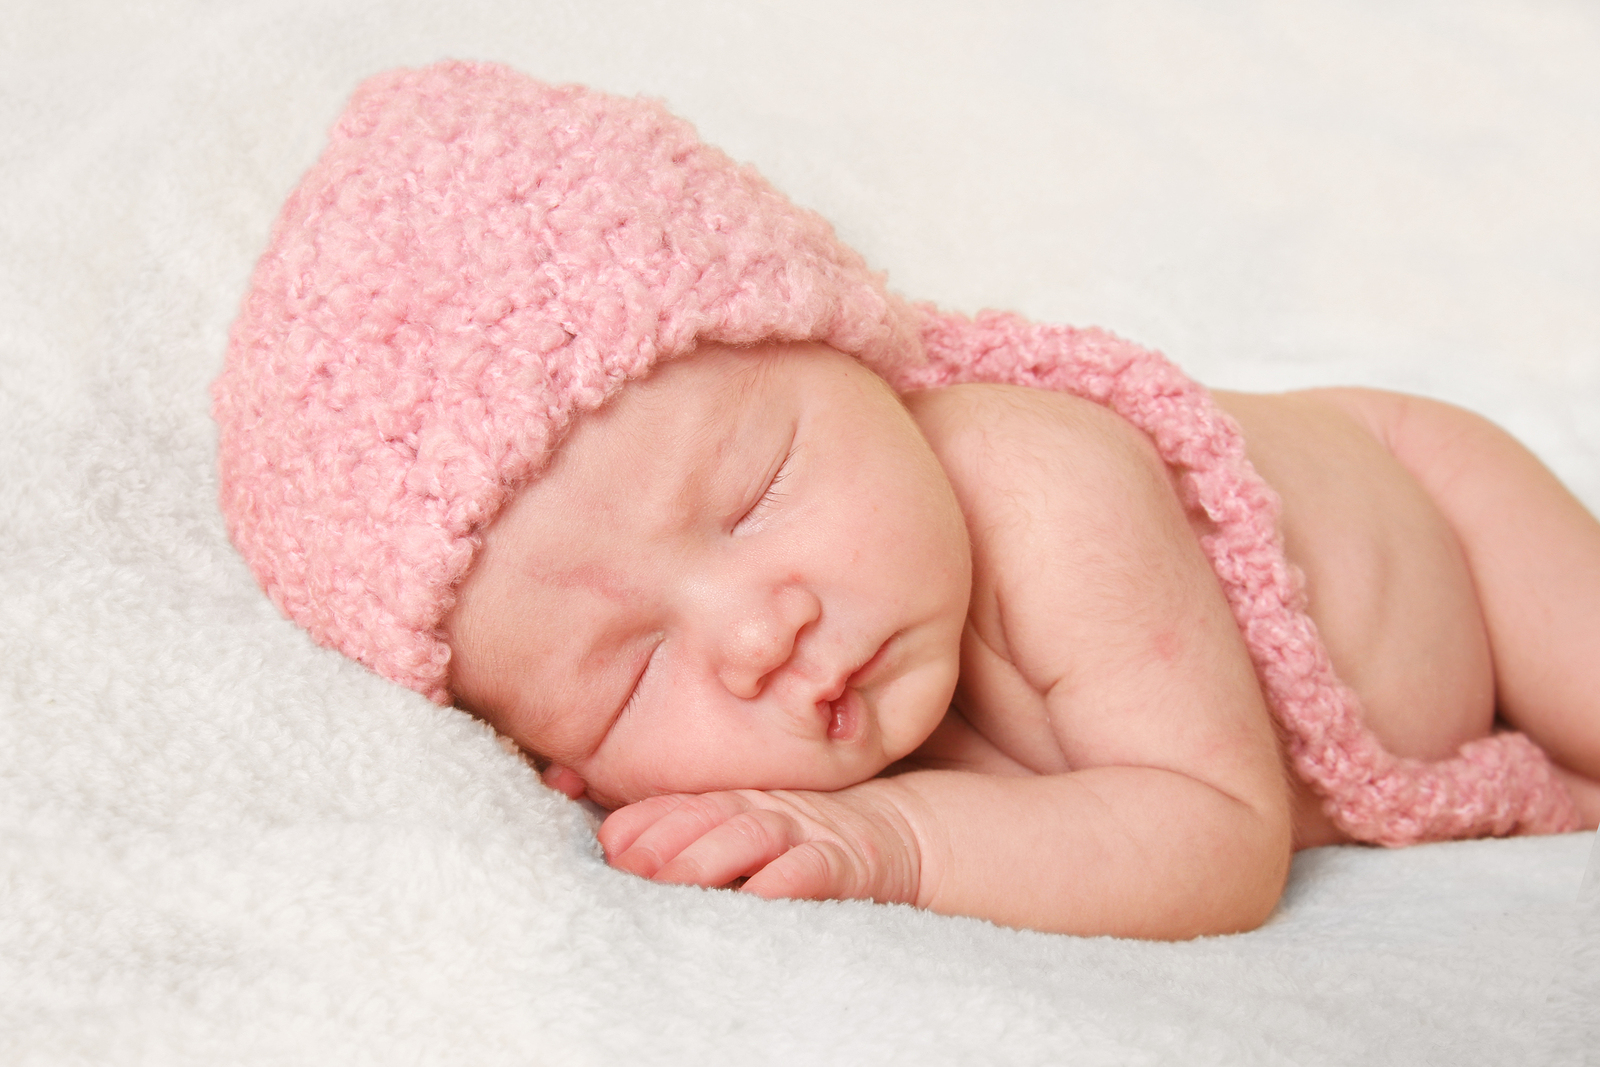 Hypothermia Cure-Cooling Infants to Battle Brain Damage